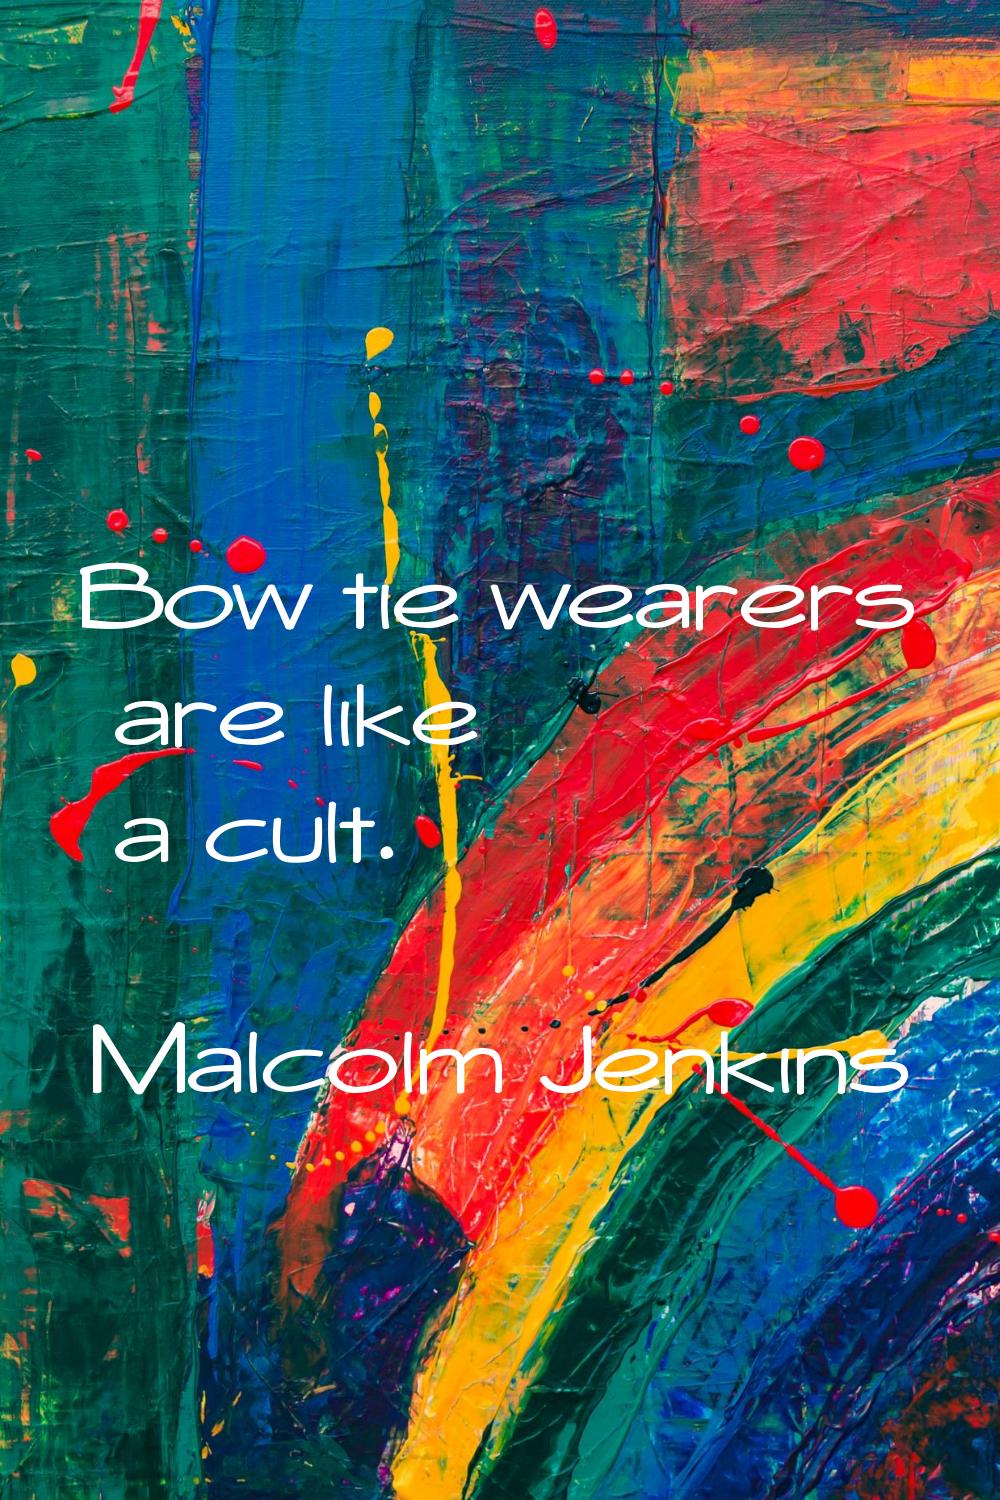 Bow tie wearers are like a cult.